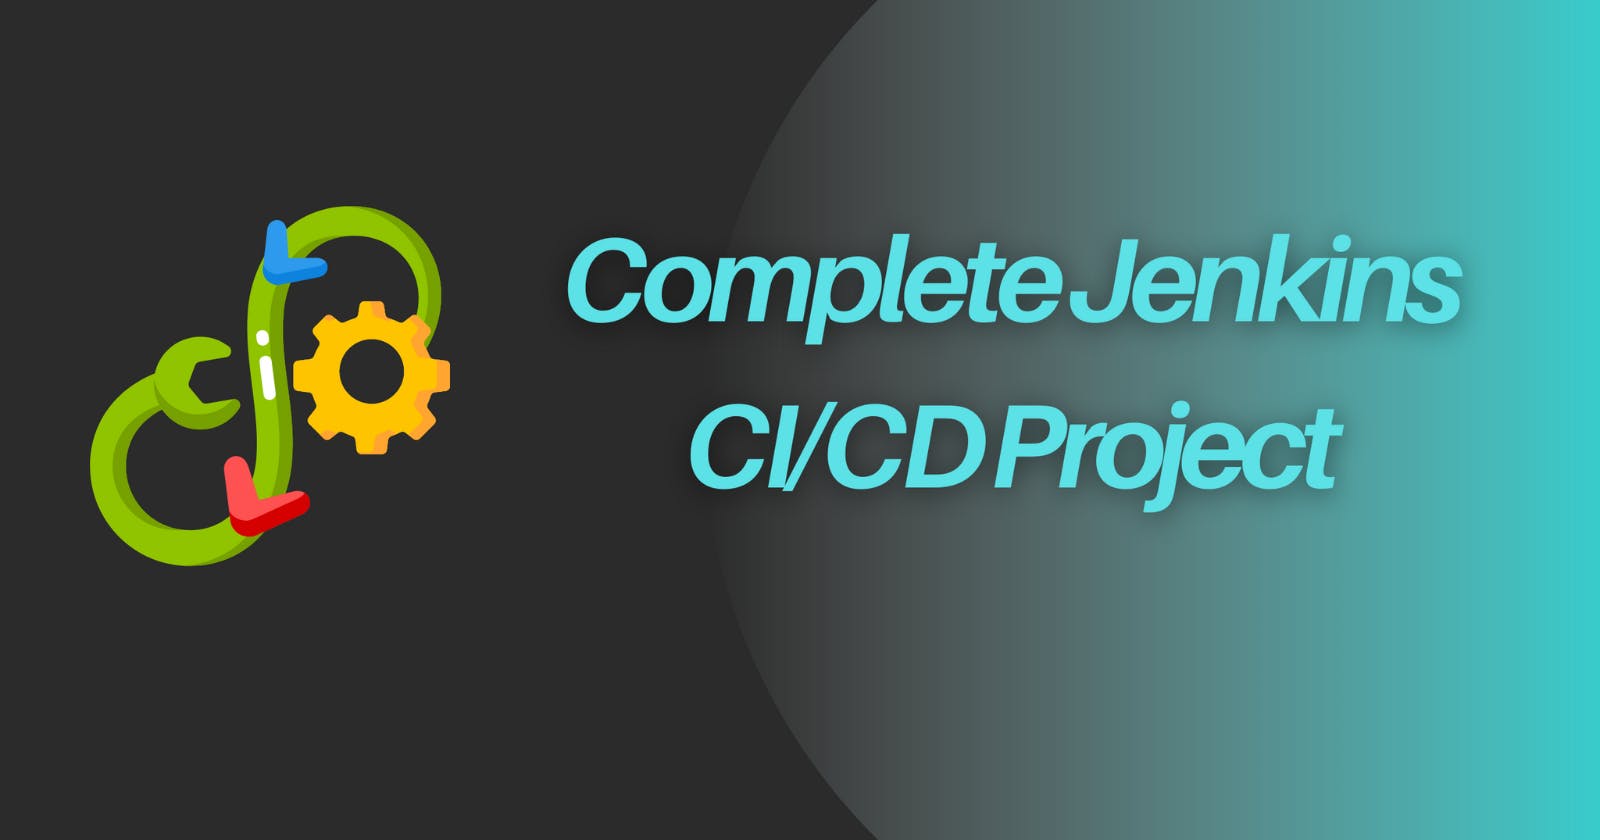 ⚒Day 24- Complete Jenkins CI/CD Project